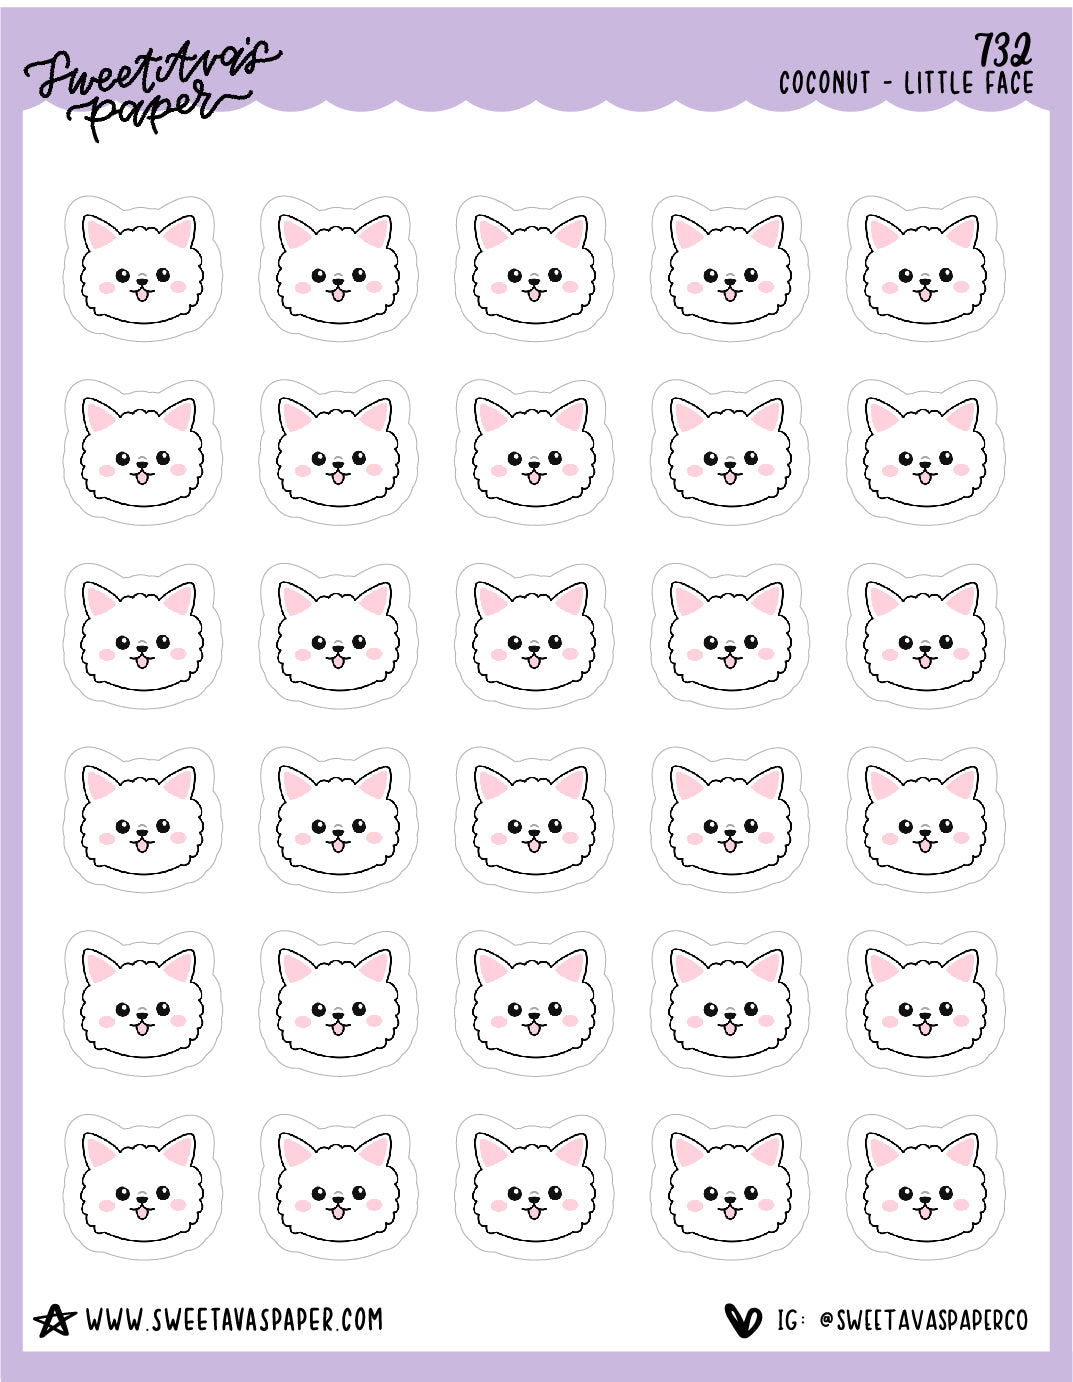 Cute Little Face Planner Stickers - Coconut the Puppy [732]